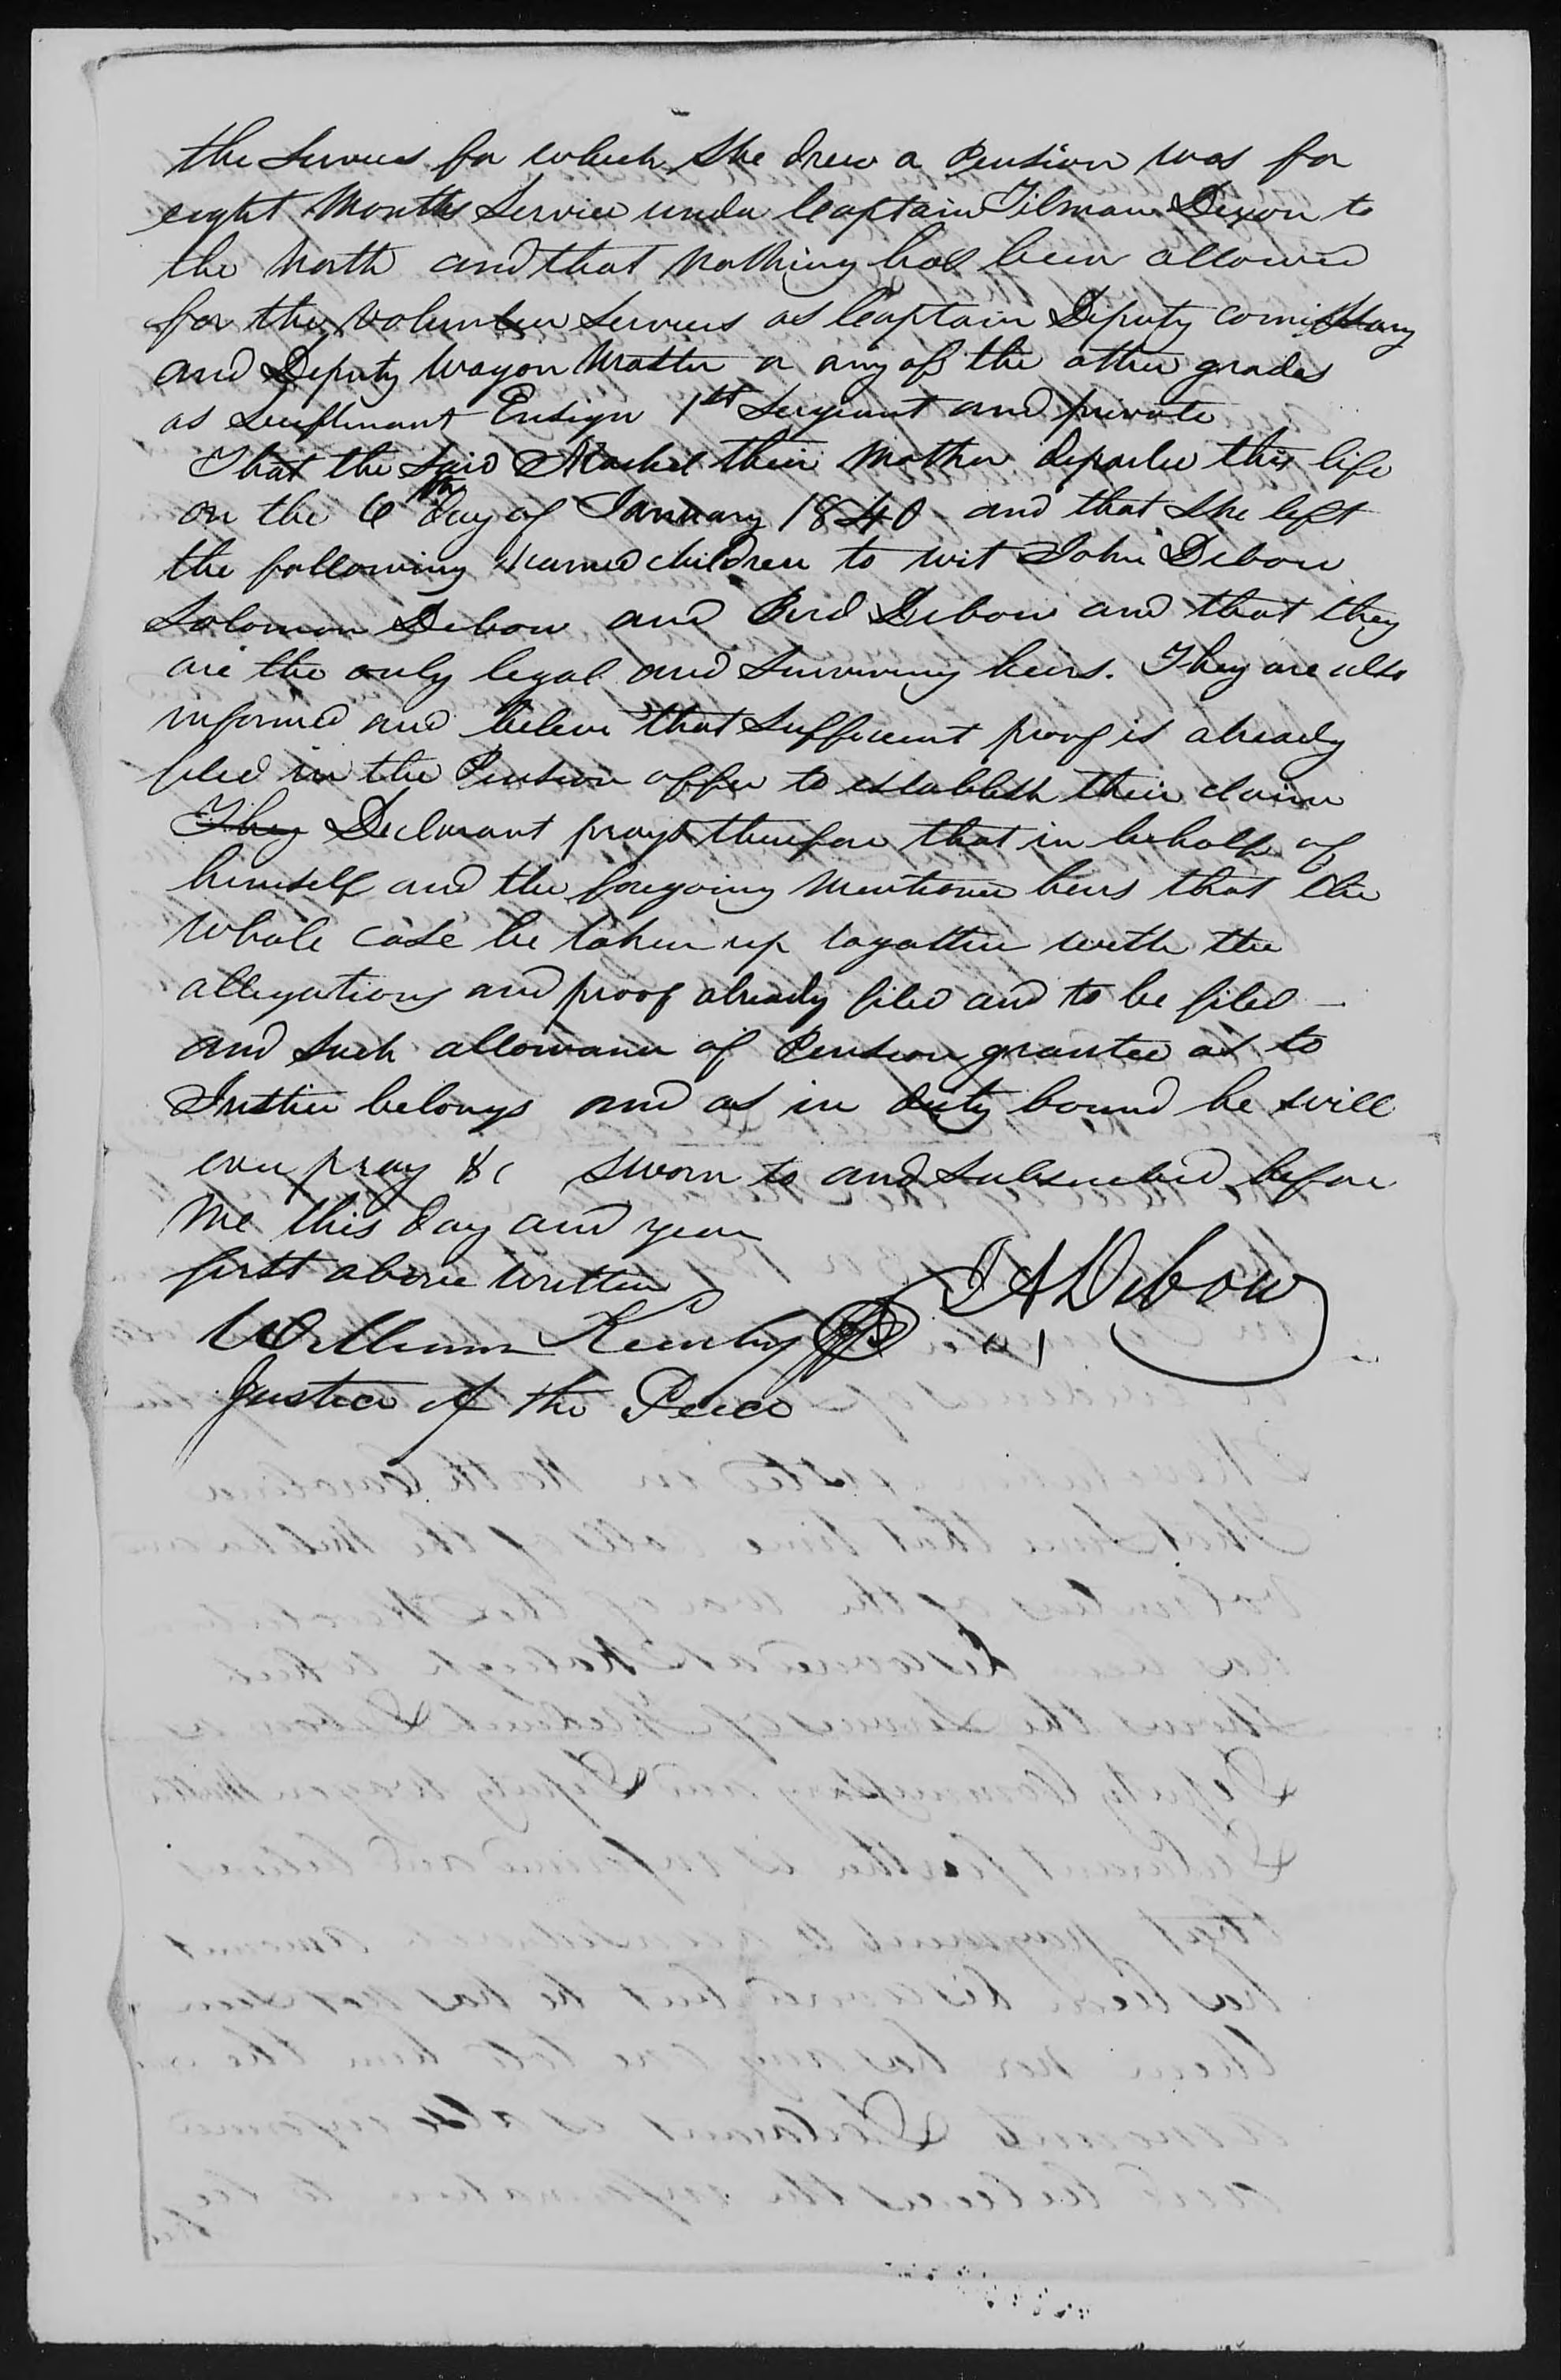 Declaration of John A. Debow to the U.S. Pension Office, 18 August 1851, page 3